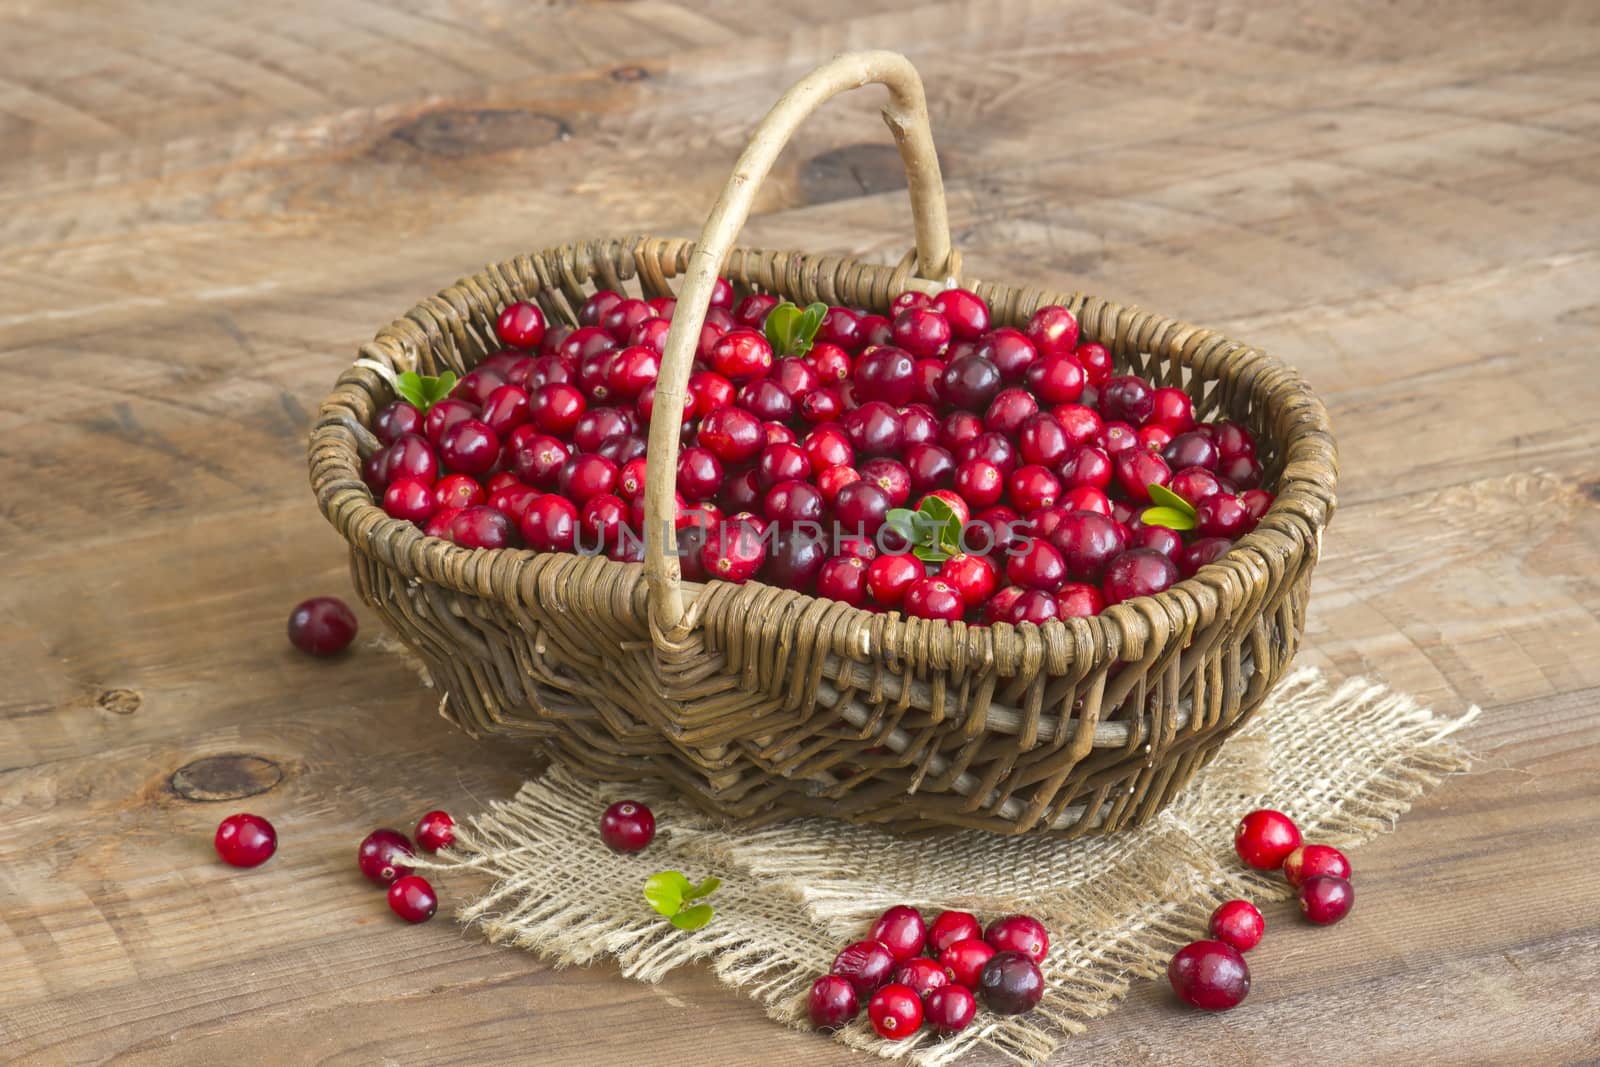 Cranberries in a basket on wooden background.